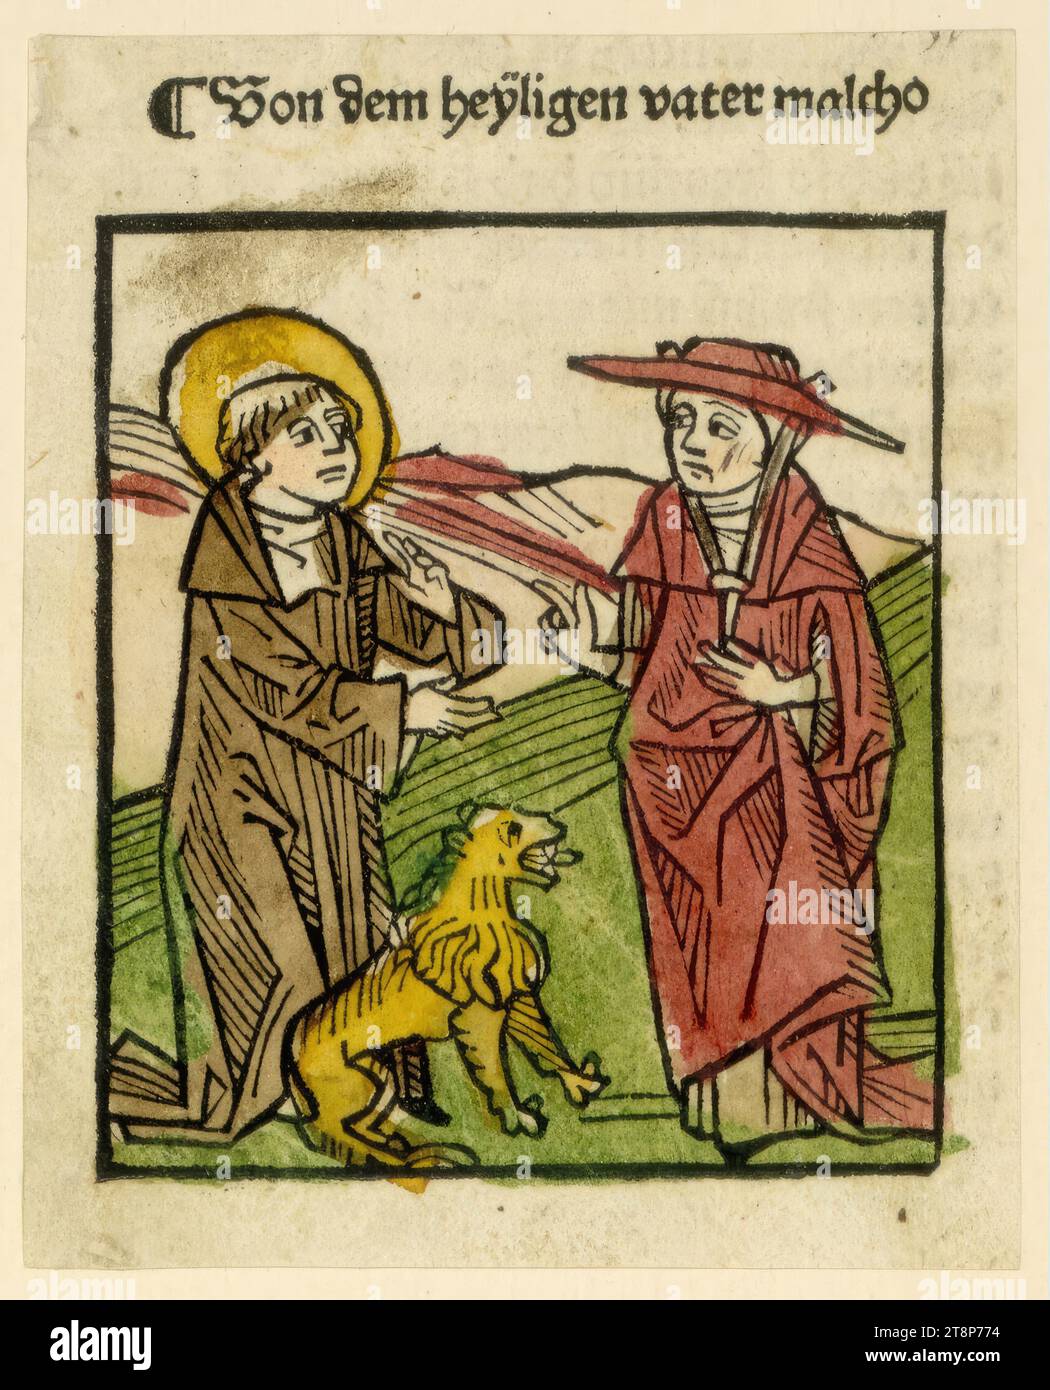 From the Holy Father Malchus, illustration to 'Life of the Holy Elders' by Sophronius Eusebius Hieronymus, Augsburg, Peter Berger edition, May 21, 1488, Peter Berger (active 1486 - 1489 in Augsburg), 1488, print, woodcut, coloured, sheet: 9.3 x 7.6 cm Stock Photo